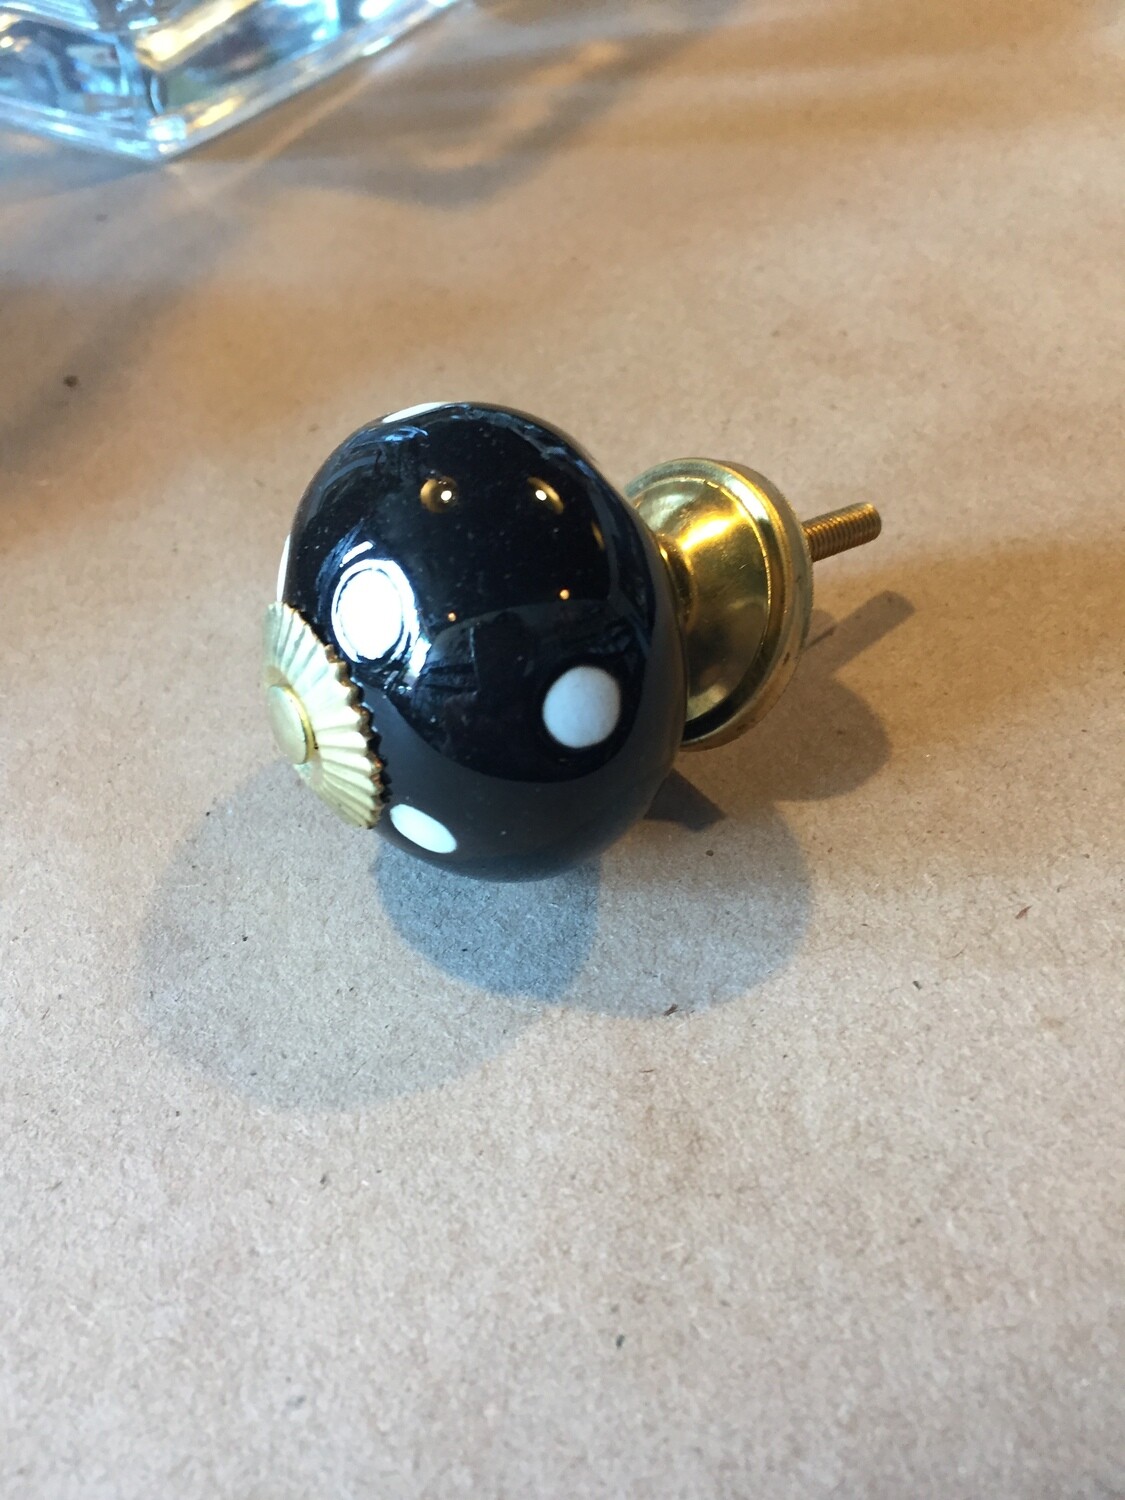 Knob - Black with white polka dots and gold accents